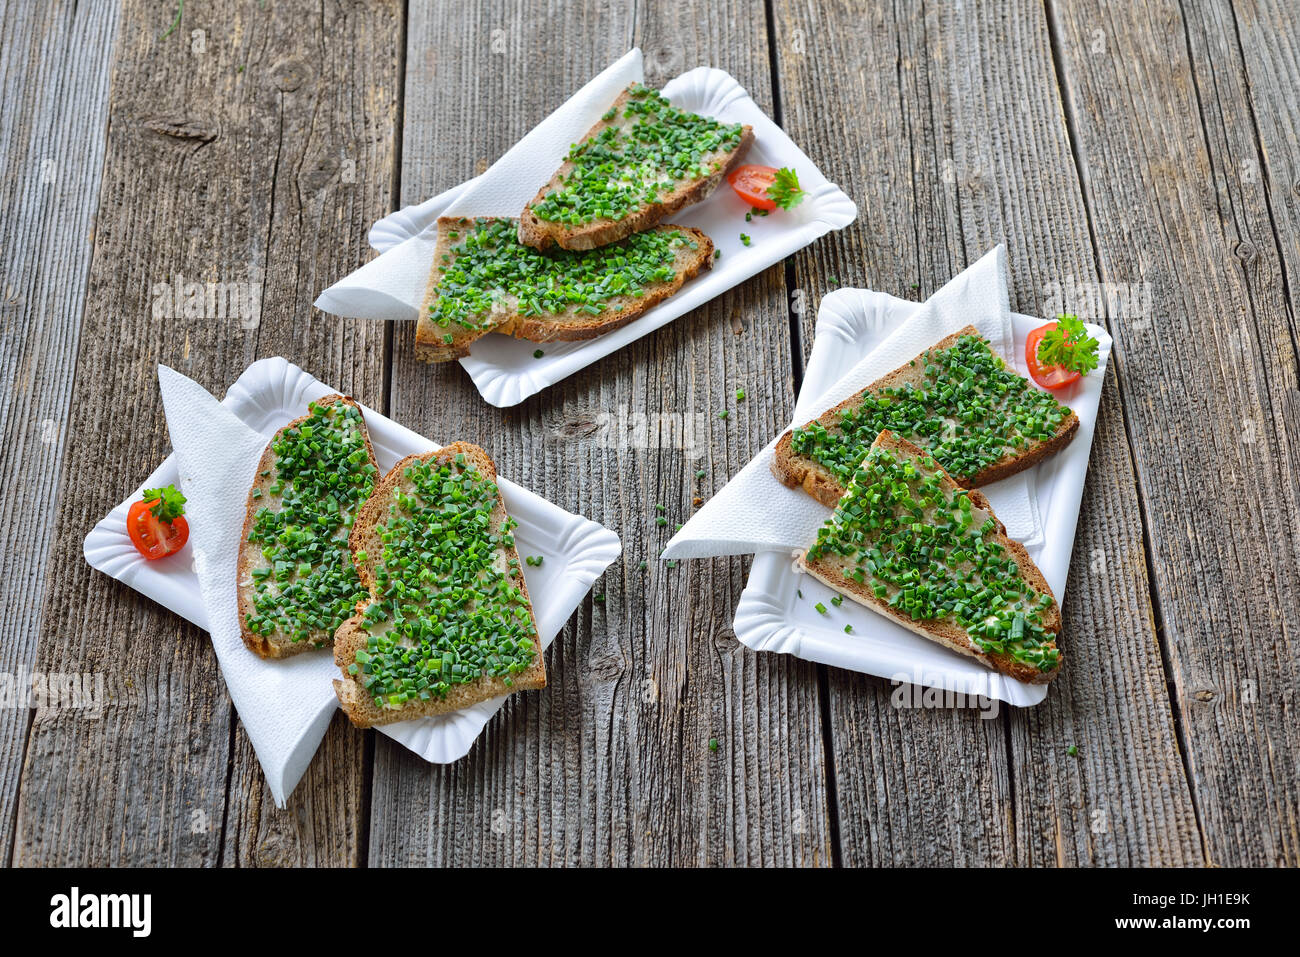 Street food: Slices of fresh farmhouse bread with butter and chopped chives on white paper plates with napkins Stock Photo